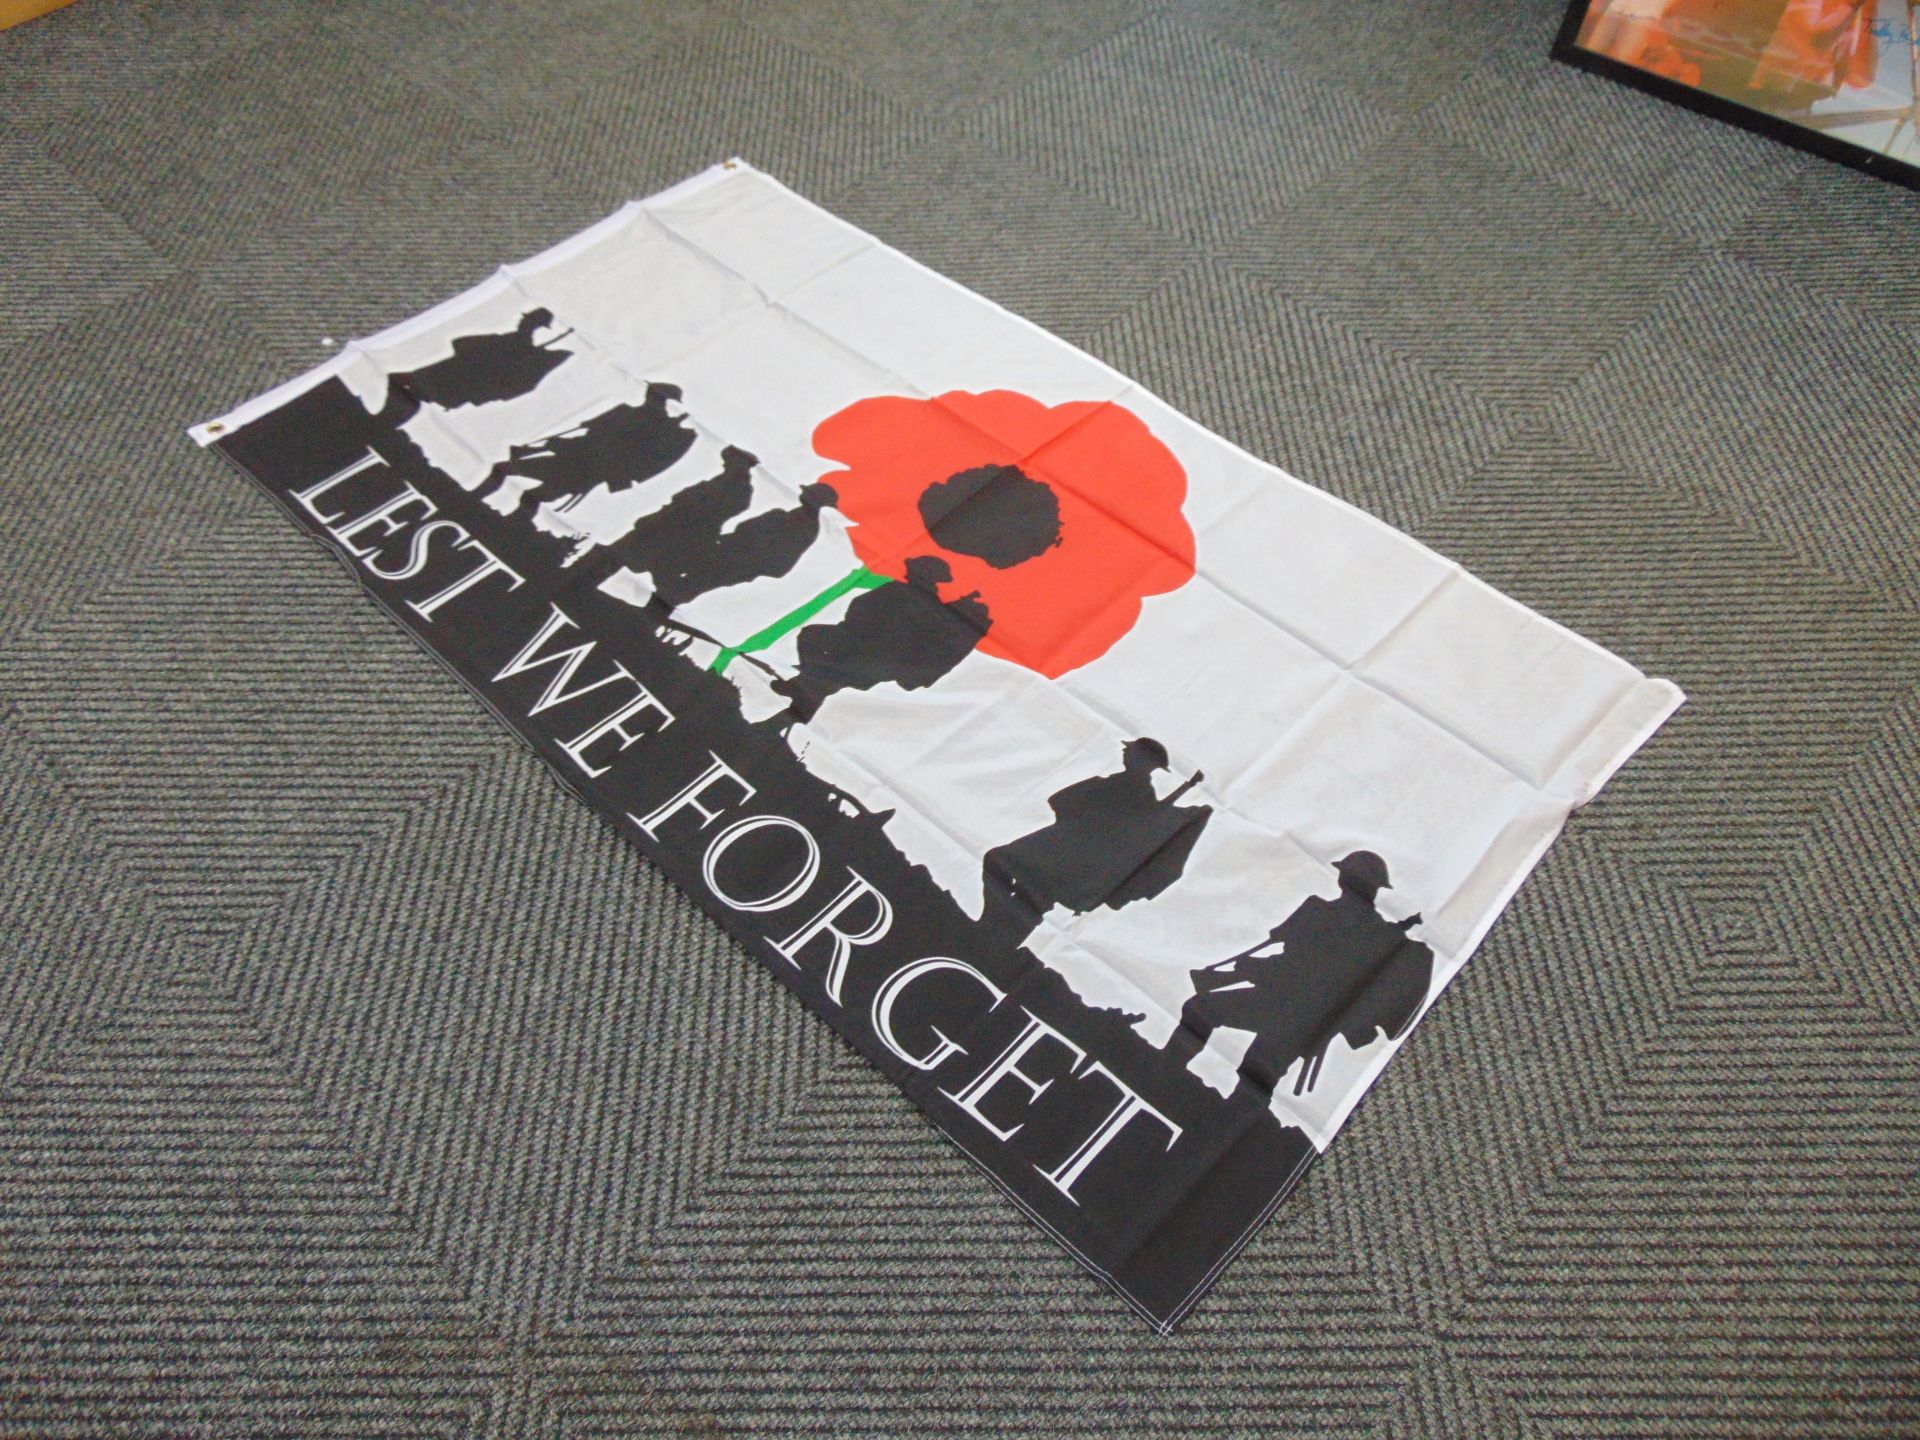 Lest We Forget (Army) Flag - 5ft x 3ft with Metal Eyelets. - Image 2 of 3